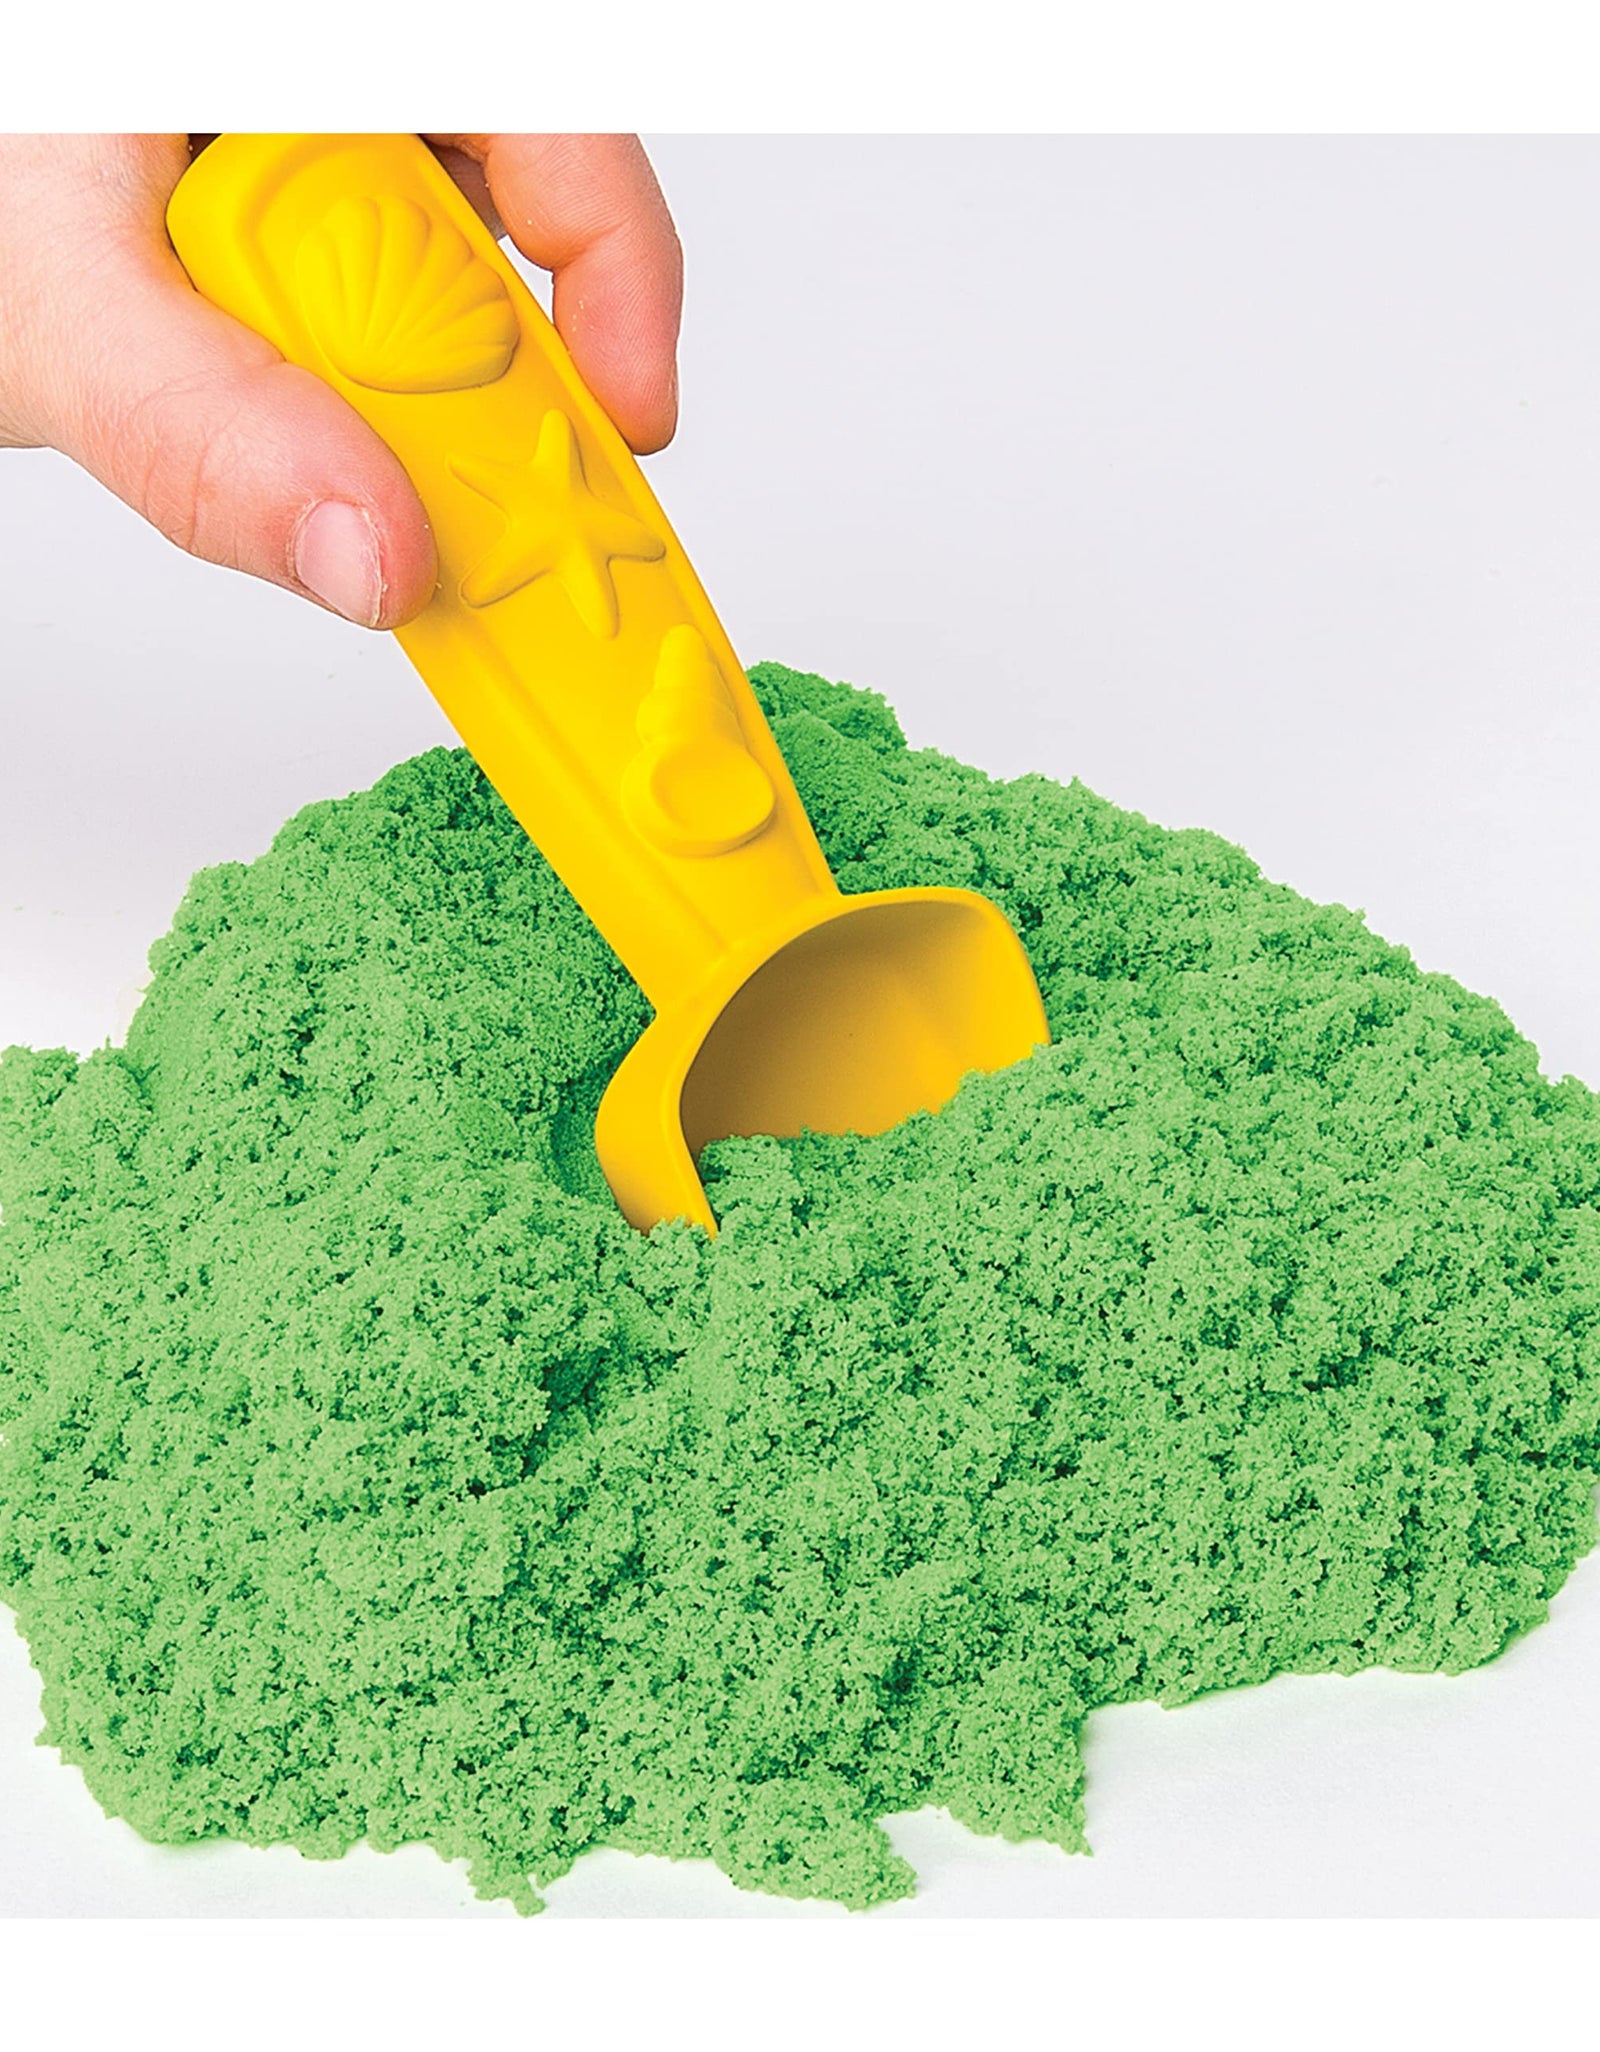 Kinetic Sand, Sandbox Playset with 1lb of Green and 3 Molds, for Ages 3 and up